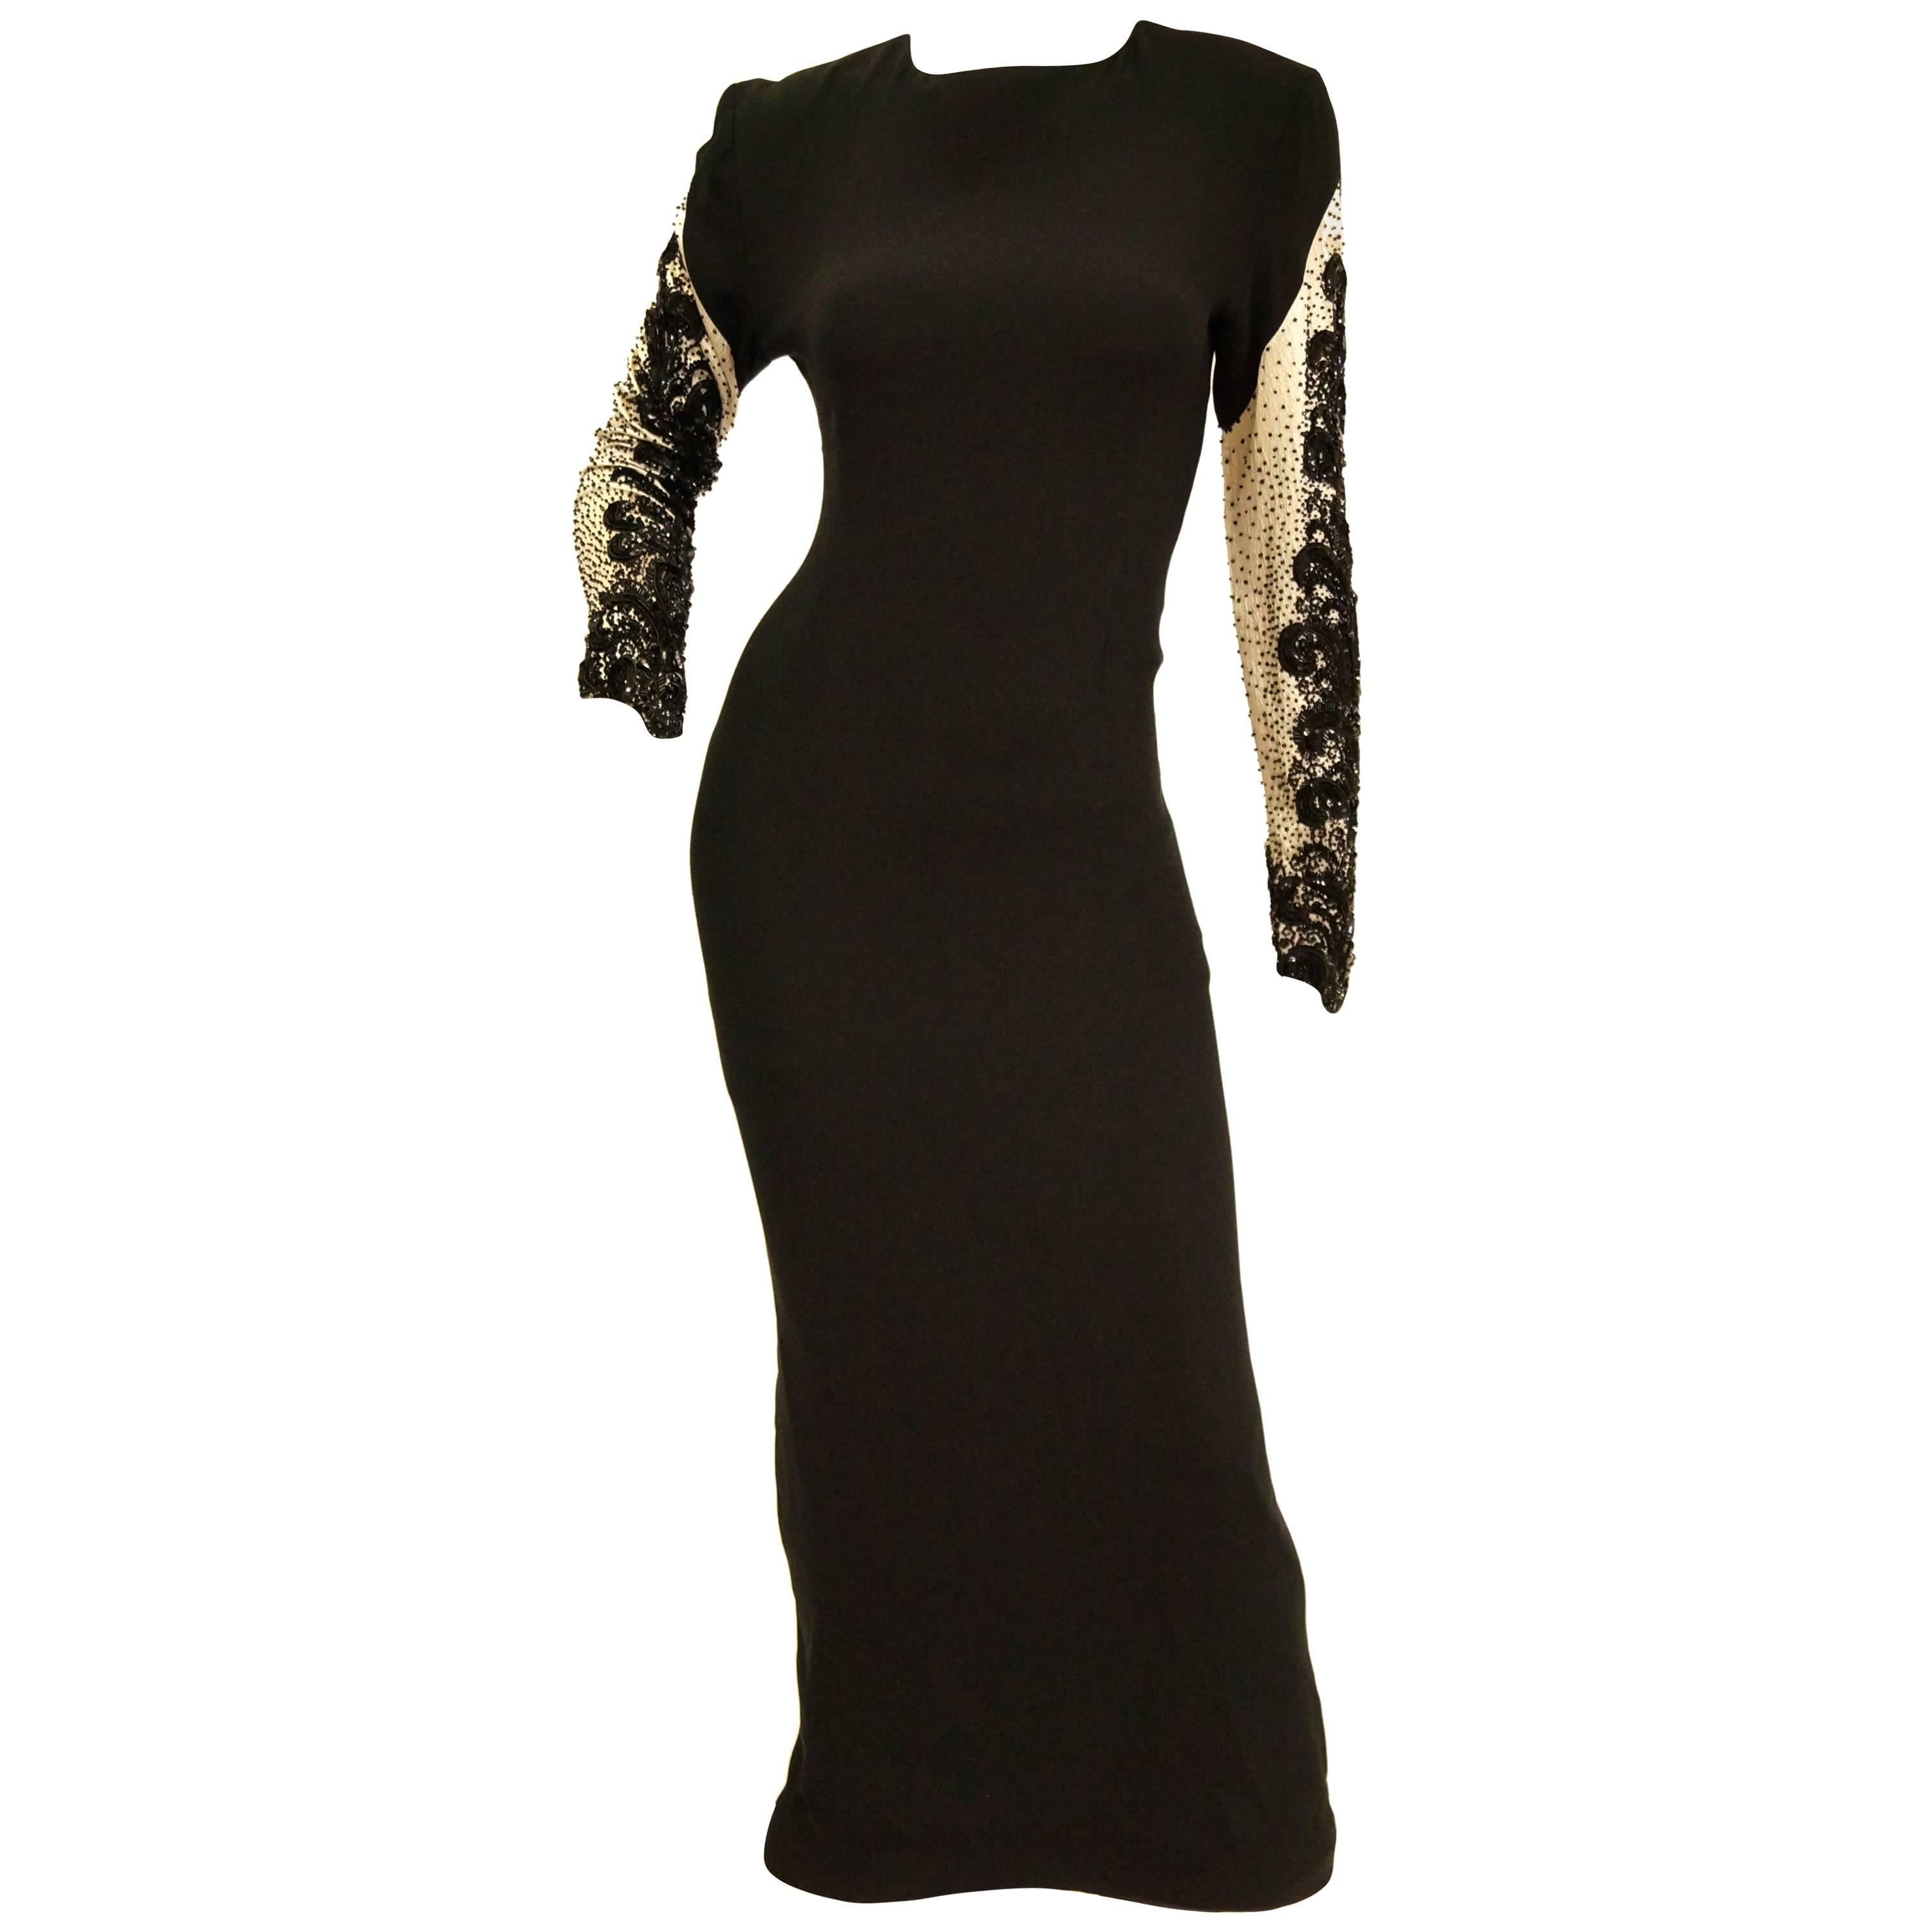 1980s Bill Blass Couture Black and White Beaded Evening Dress For Sale